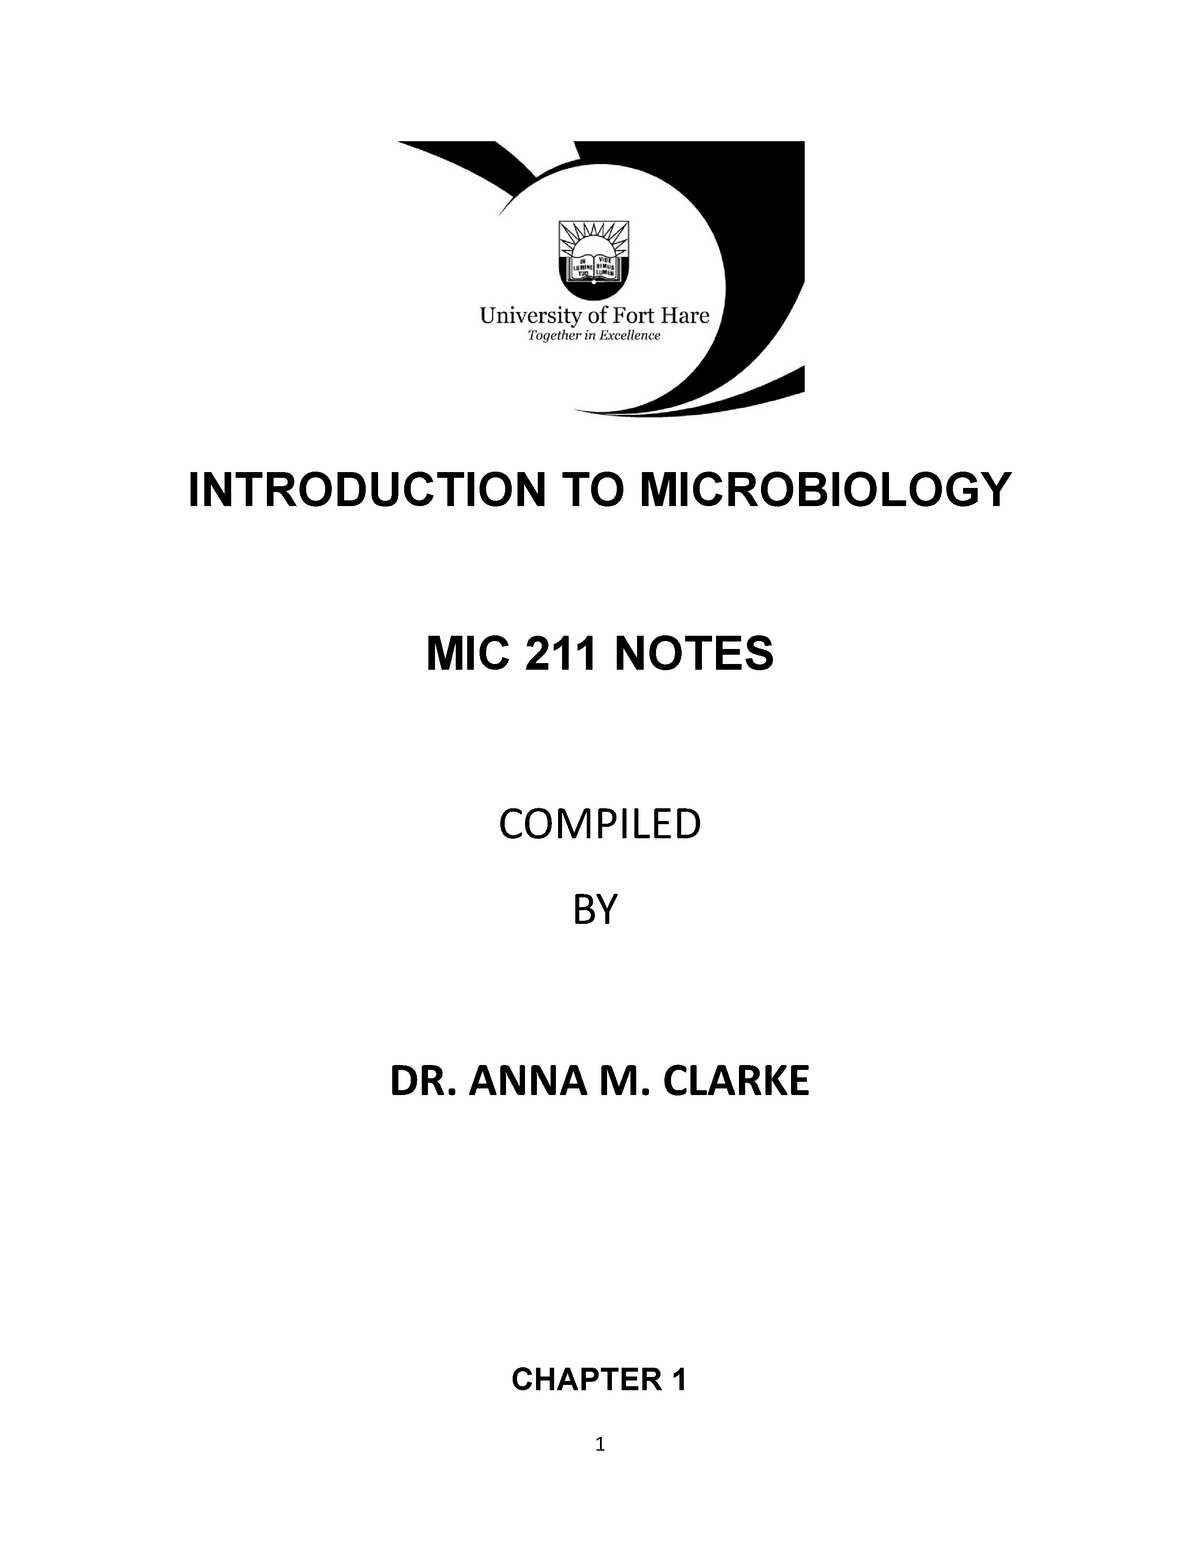 dissertation in microbiology